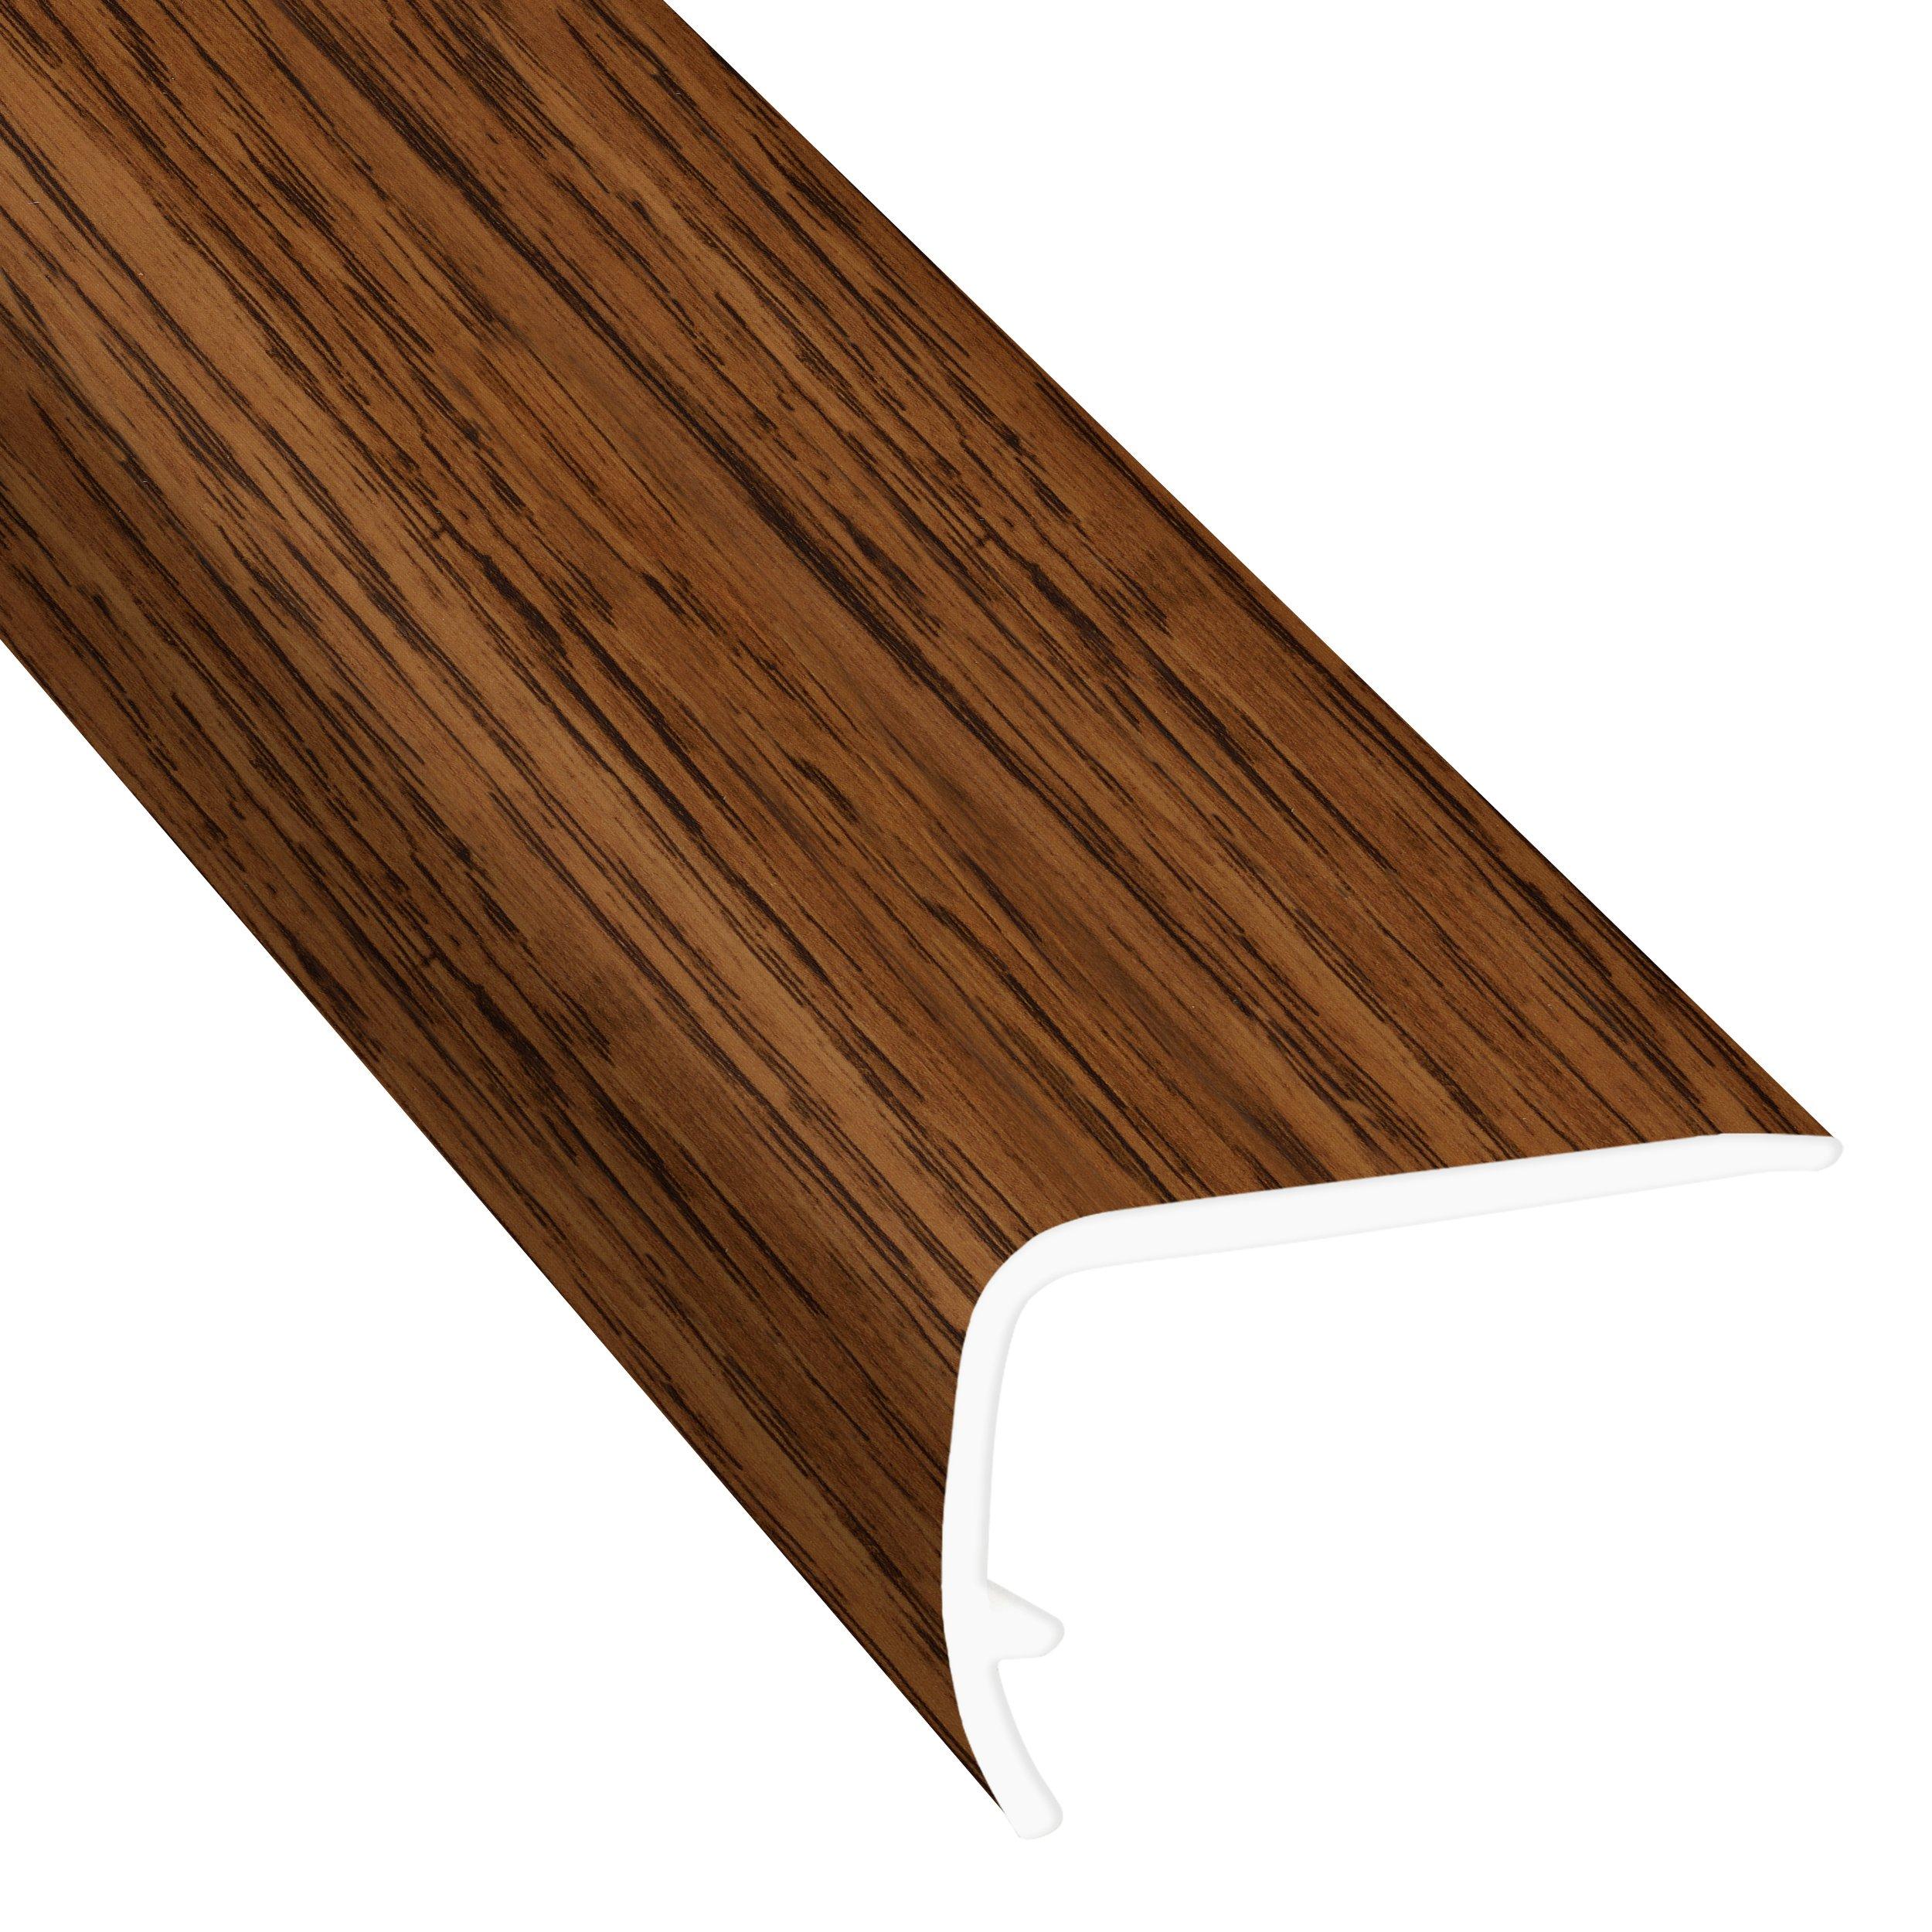 Nolan Hickory 94in. Vinyl Overlapping Stair Nose